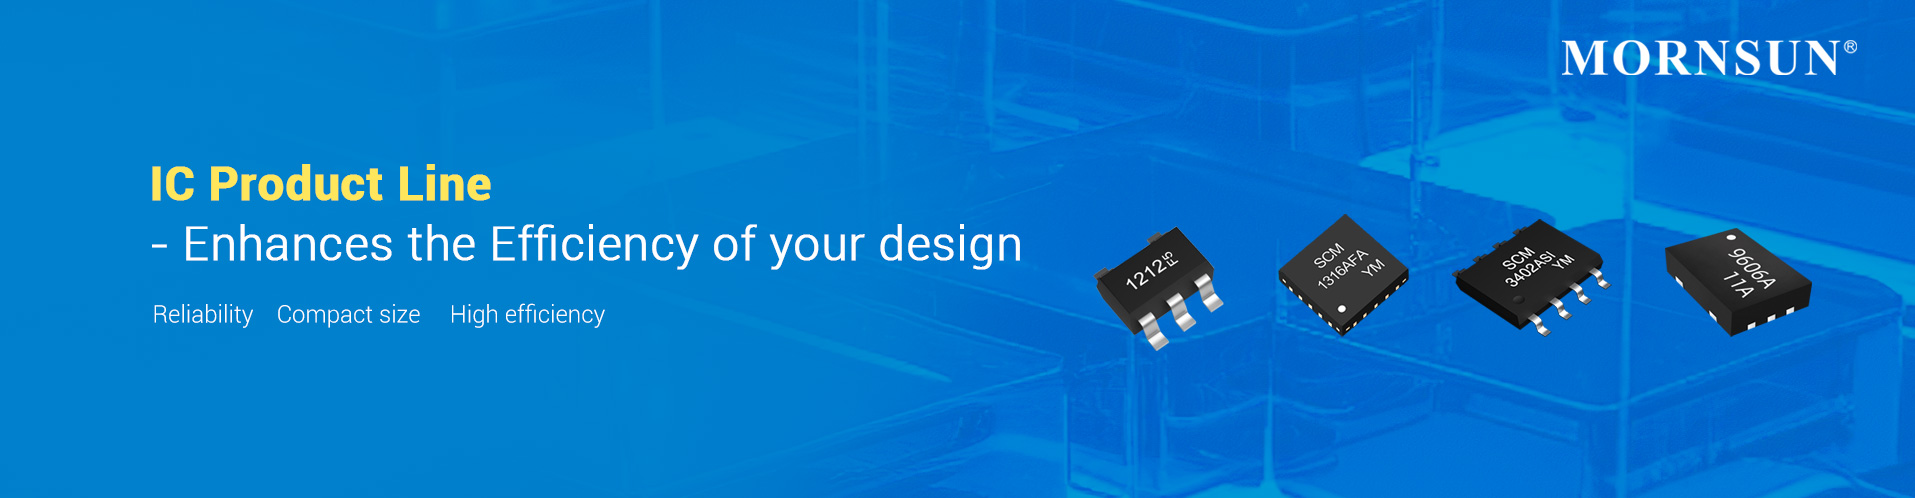 IC Product Line - Enhances Efficiency of your design